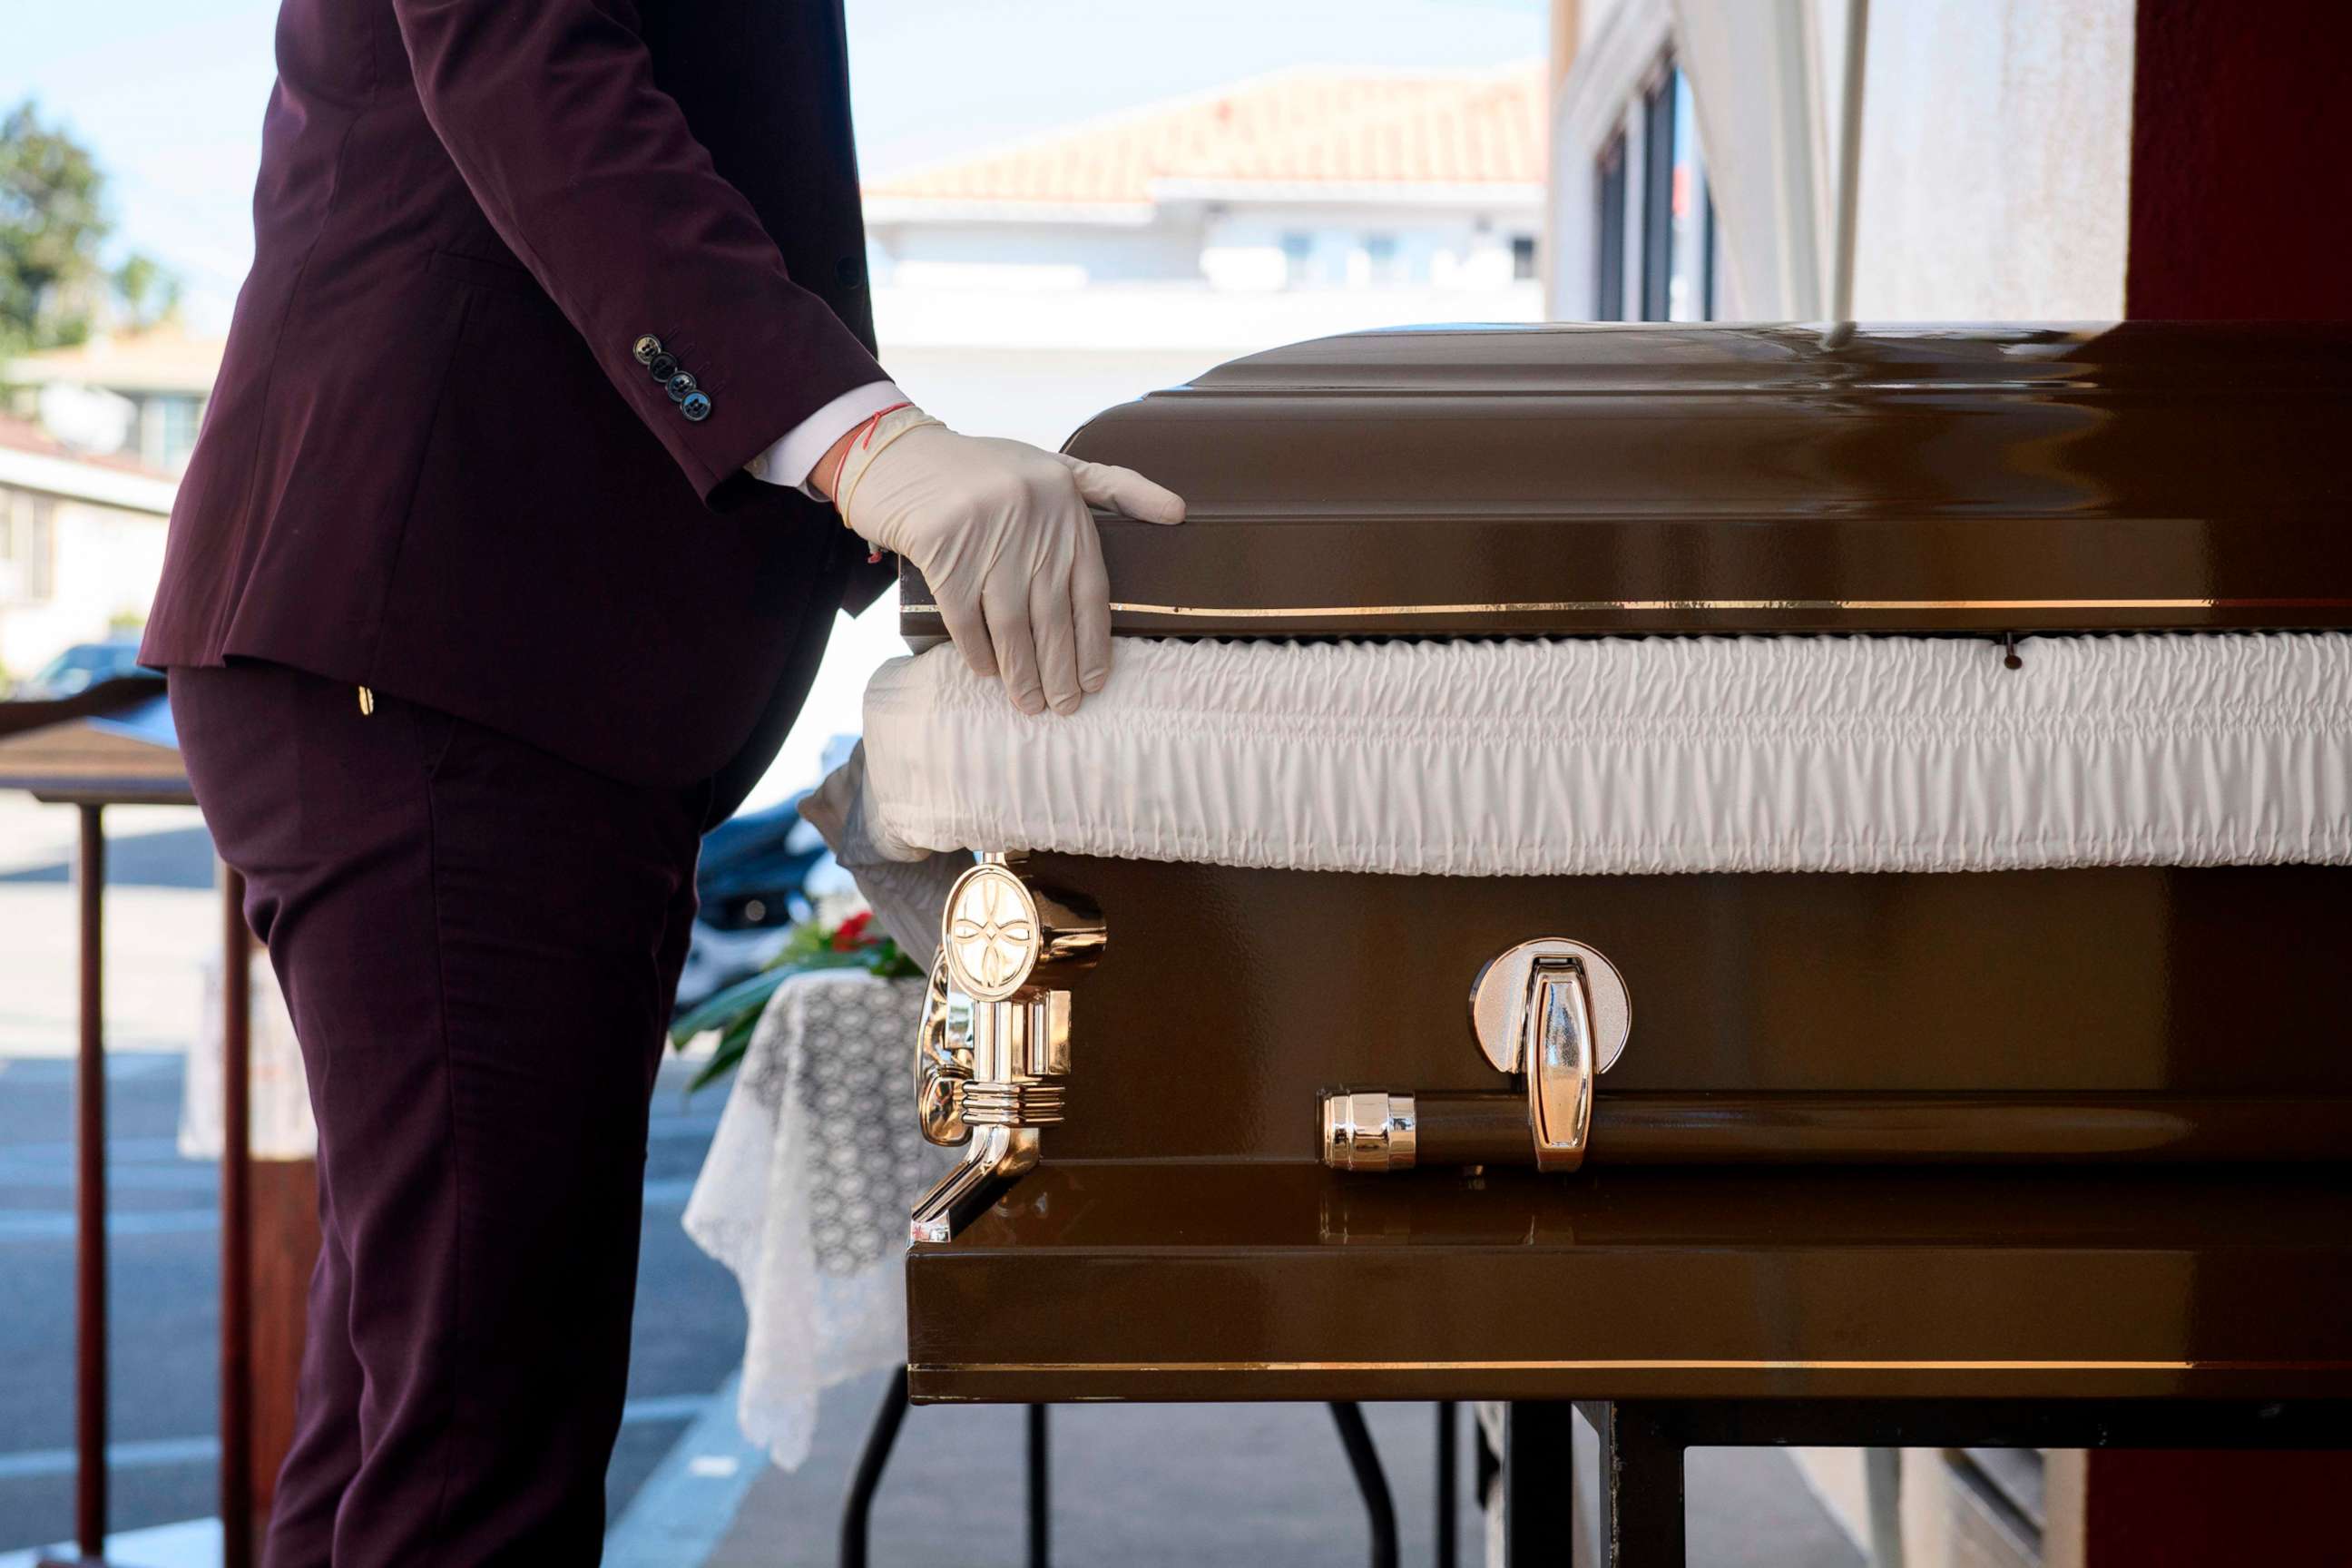 PHOTO: Funeral director Steven Correa wears gloves as he moves the casket of Gilberto Arreguin Camacho, 58, in preparation for burial following his death due to Covid-19 at Continental Funeral Home on  Dec. 31, 2020, in East Los Angeles, Calif.